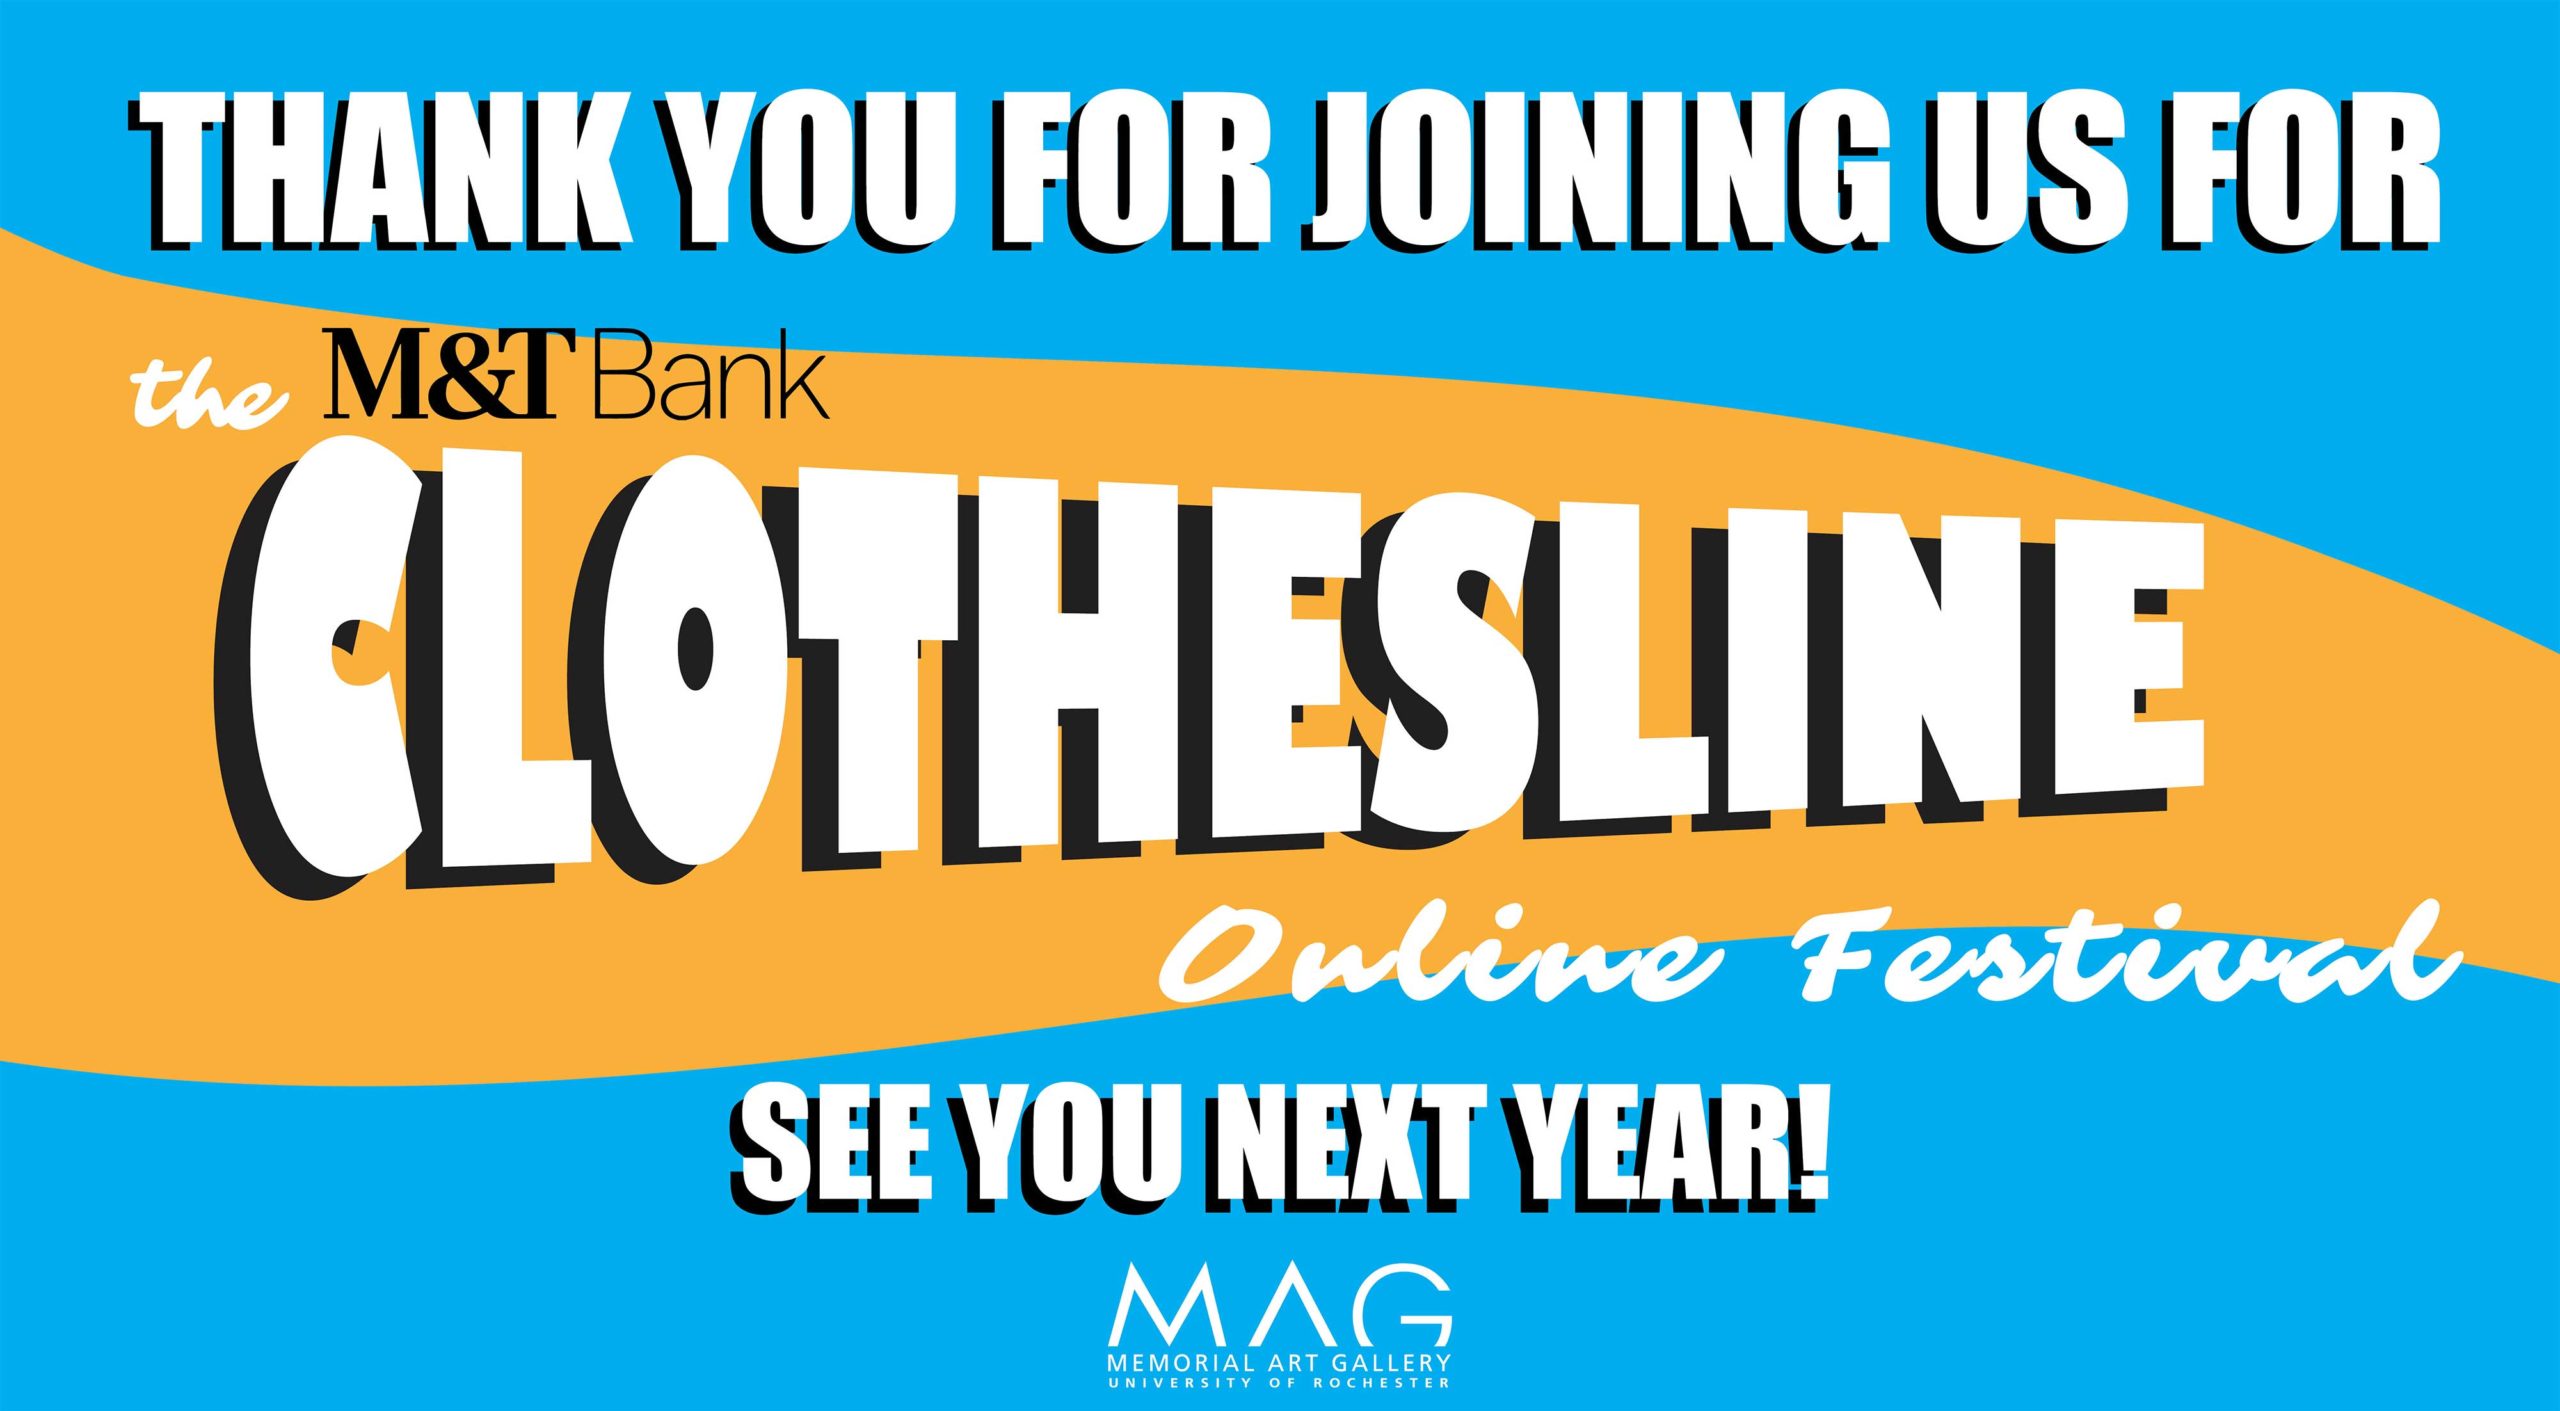 Thank you for joining us for the M&T Bank Clothesline Online Festival - See you next year!